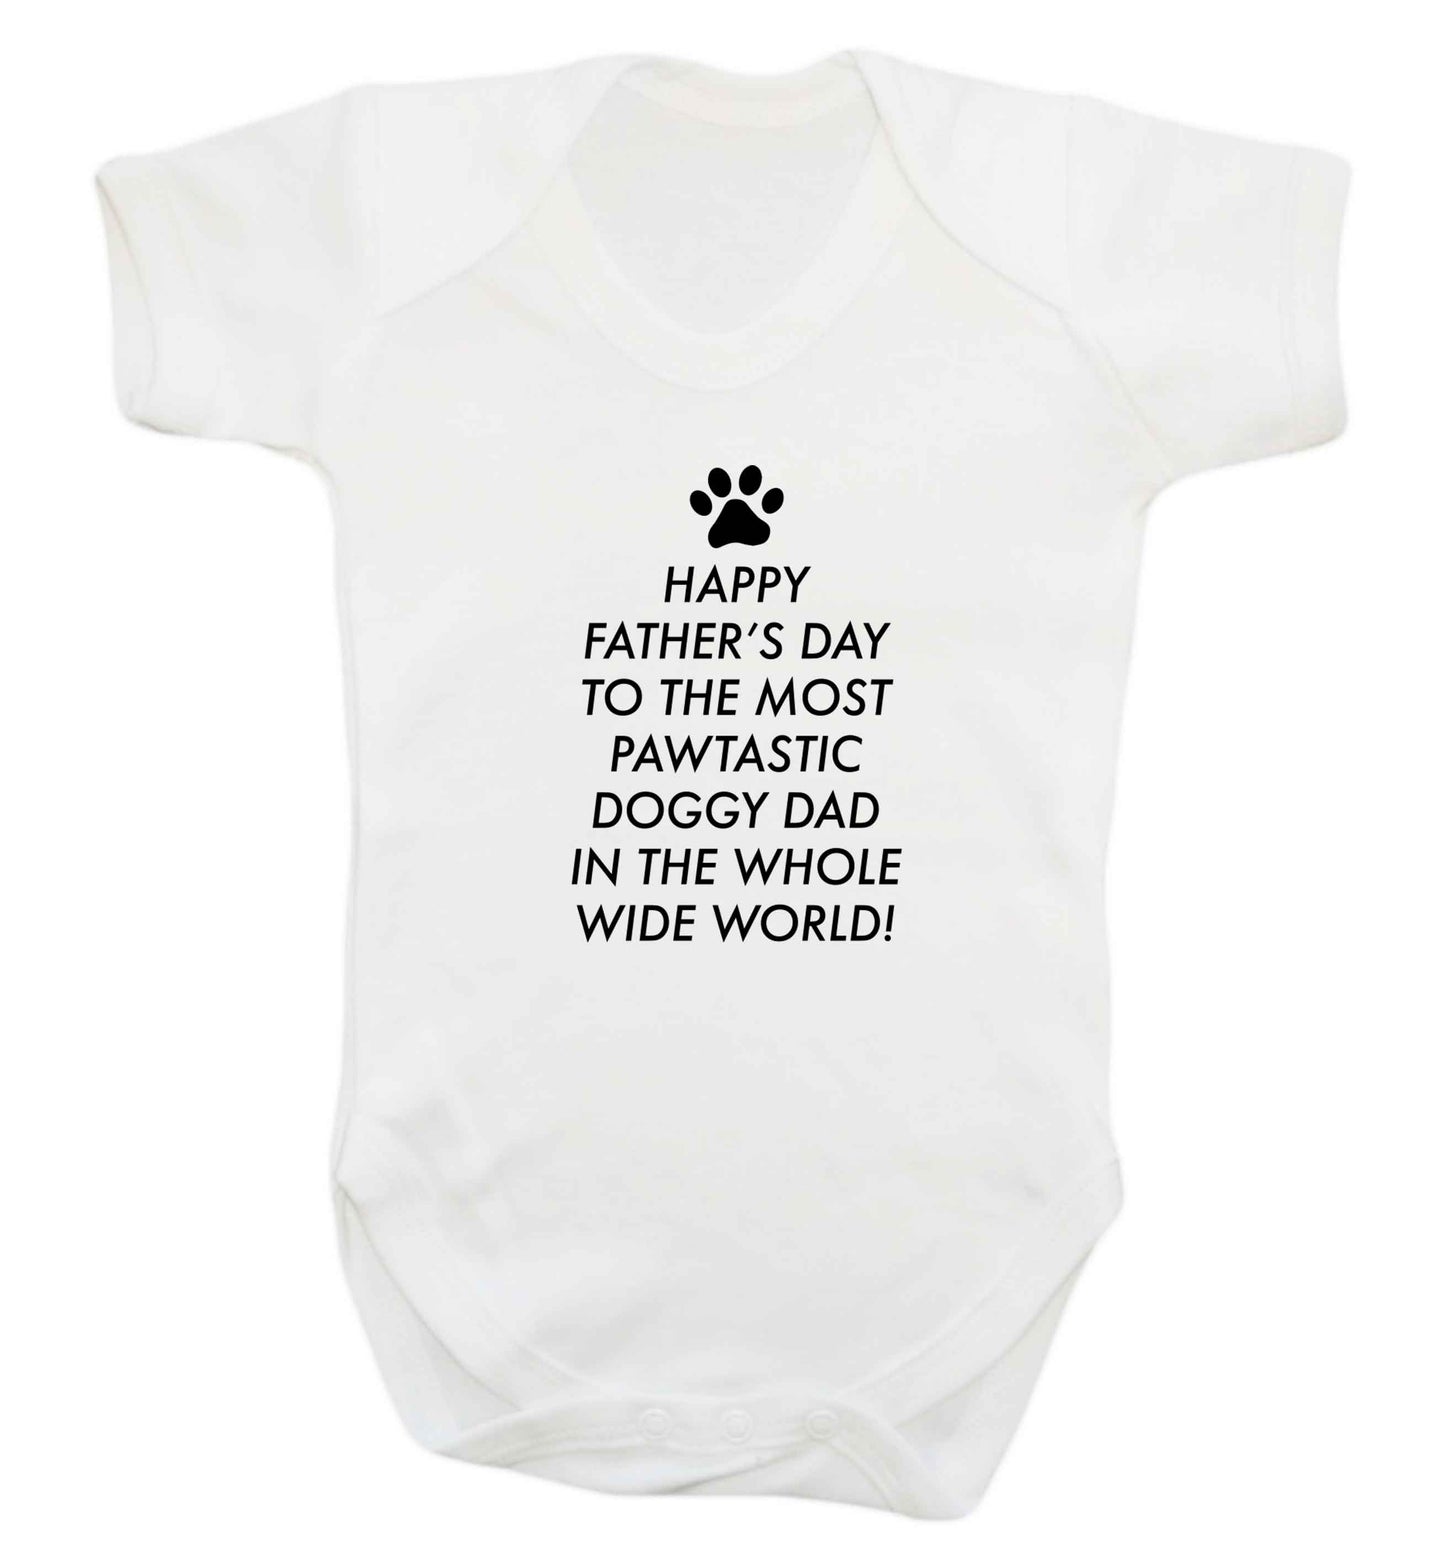 Happy Father's day to the most pawtastic doggy dad in the whole wide world!baby vest white 18-24 months